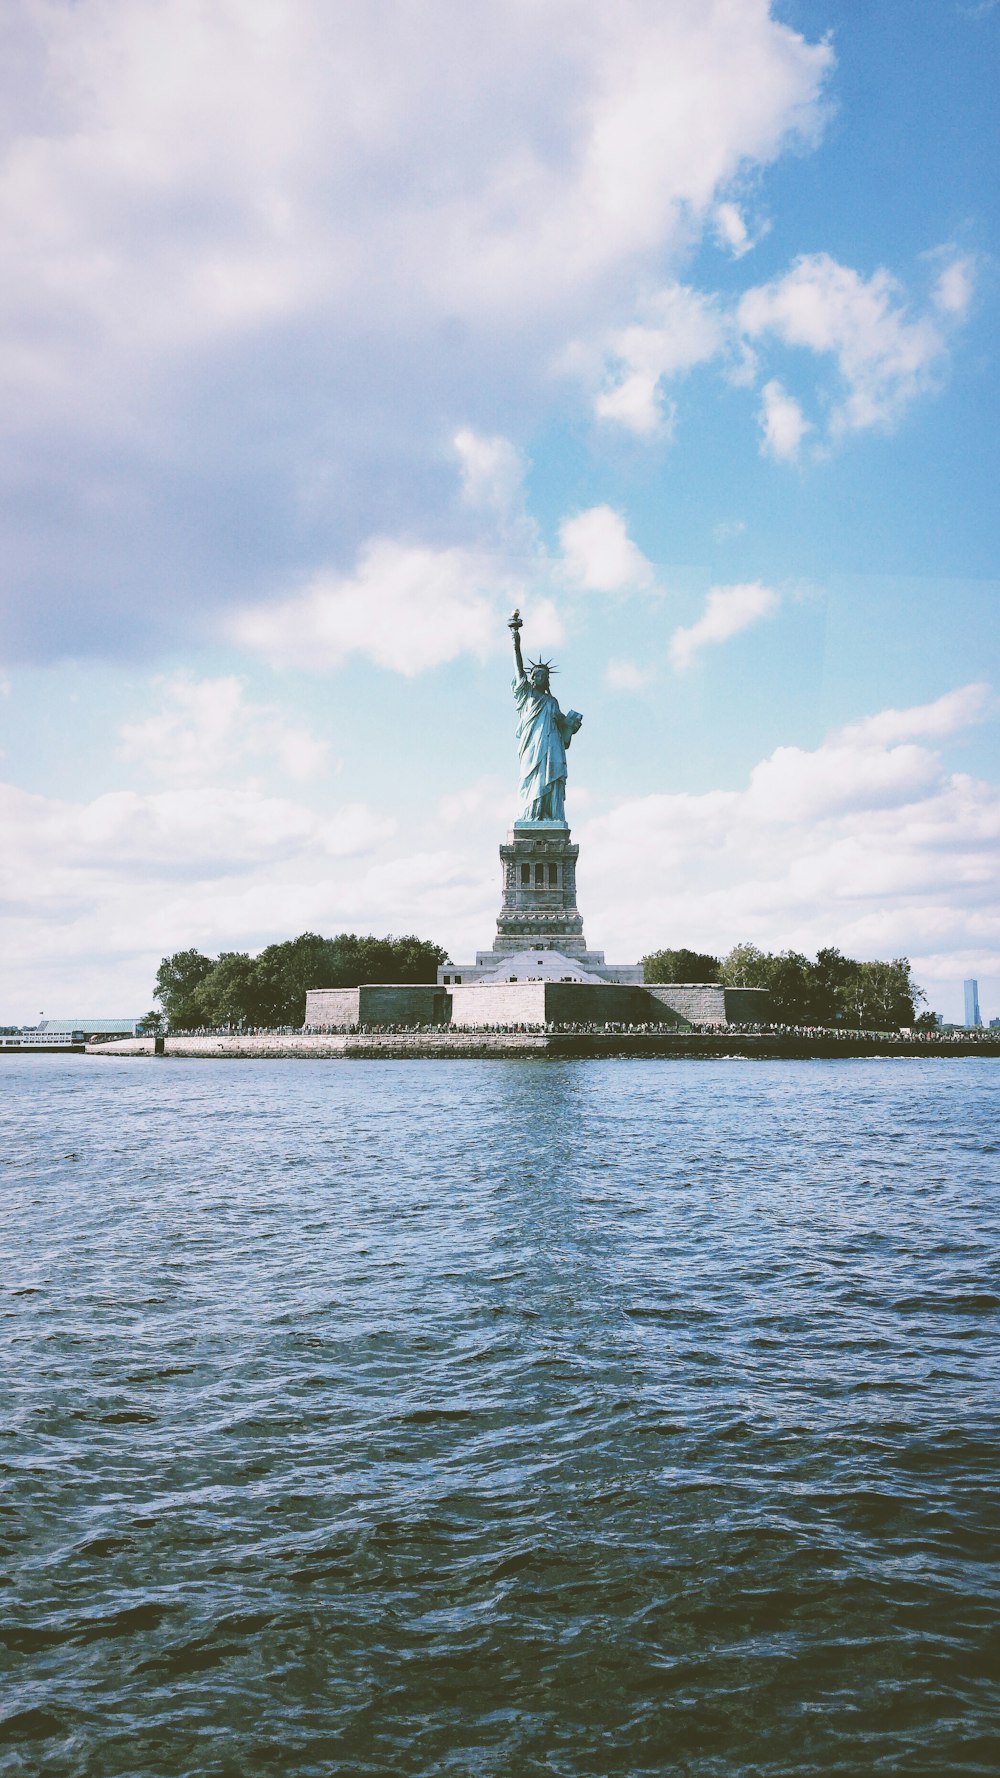 Statue of Liberty, New York Harbour